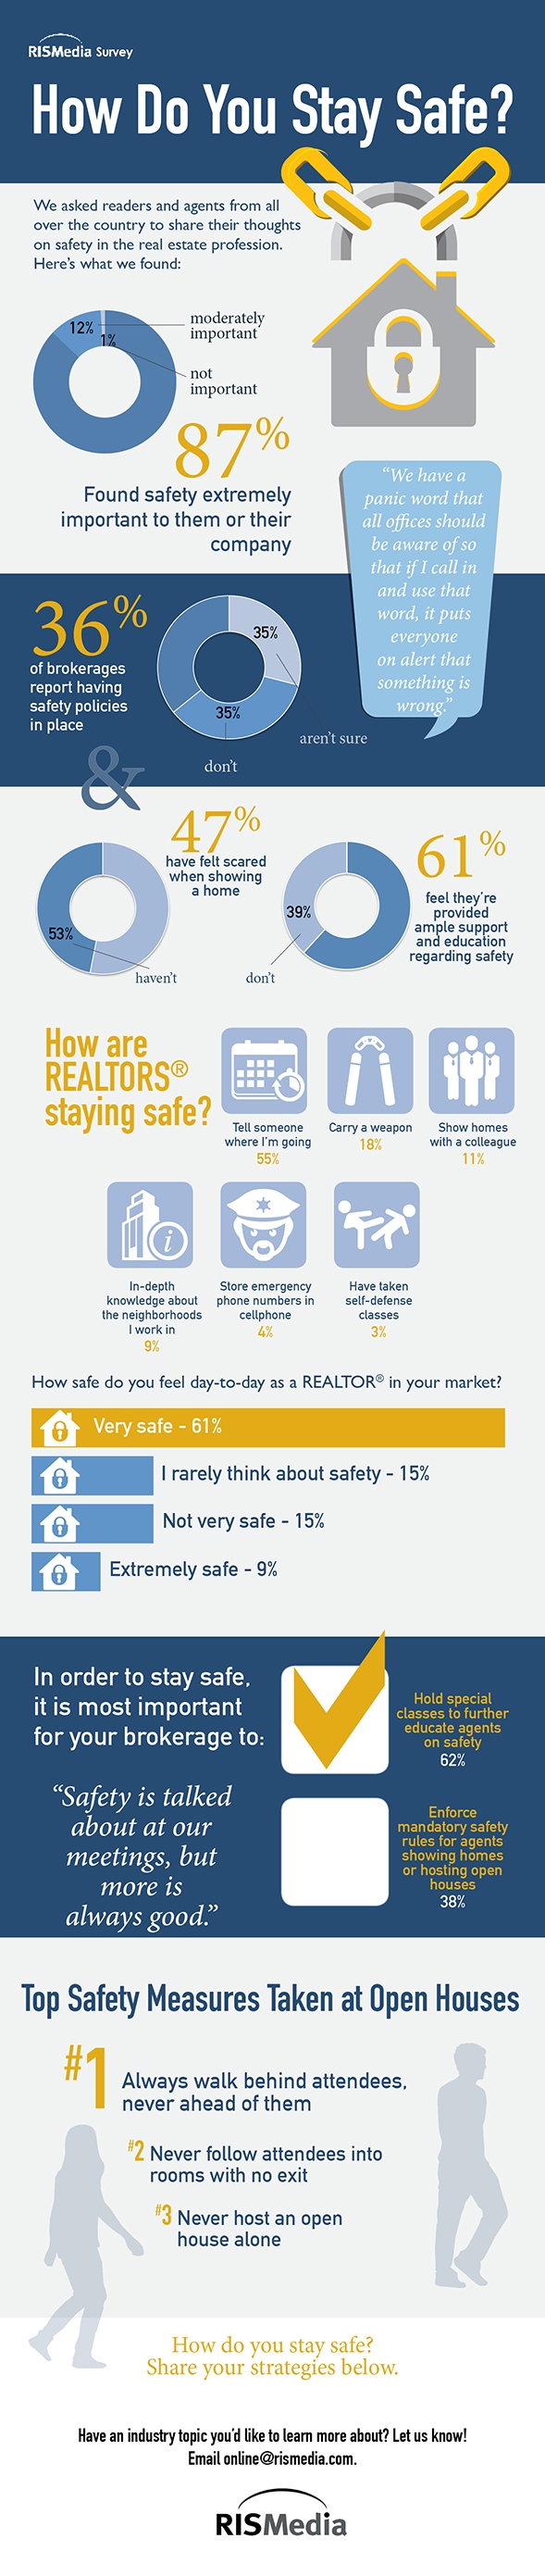 safety_survey_infographic_2015